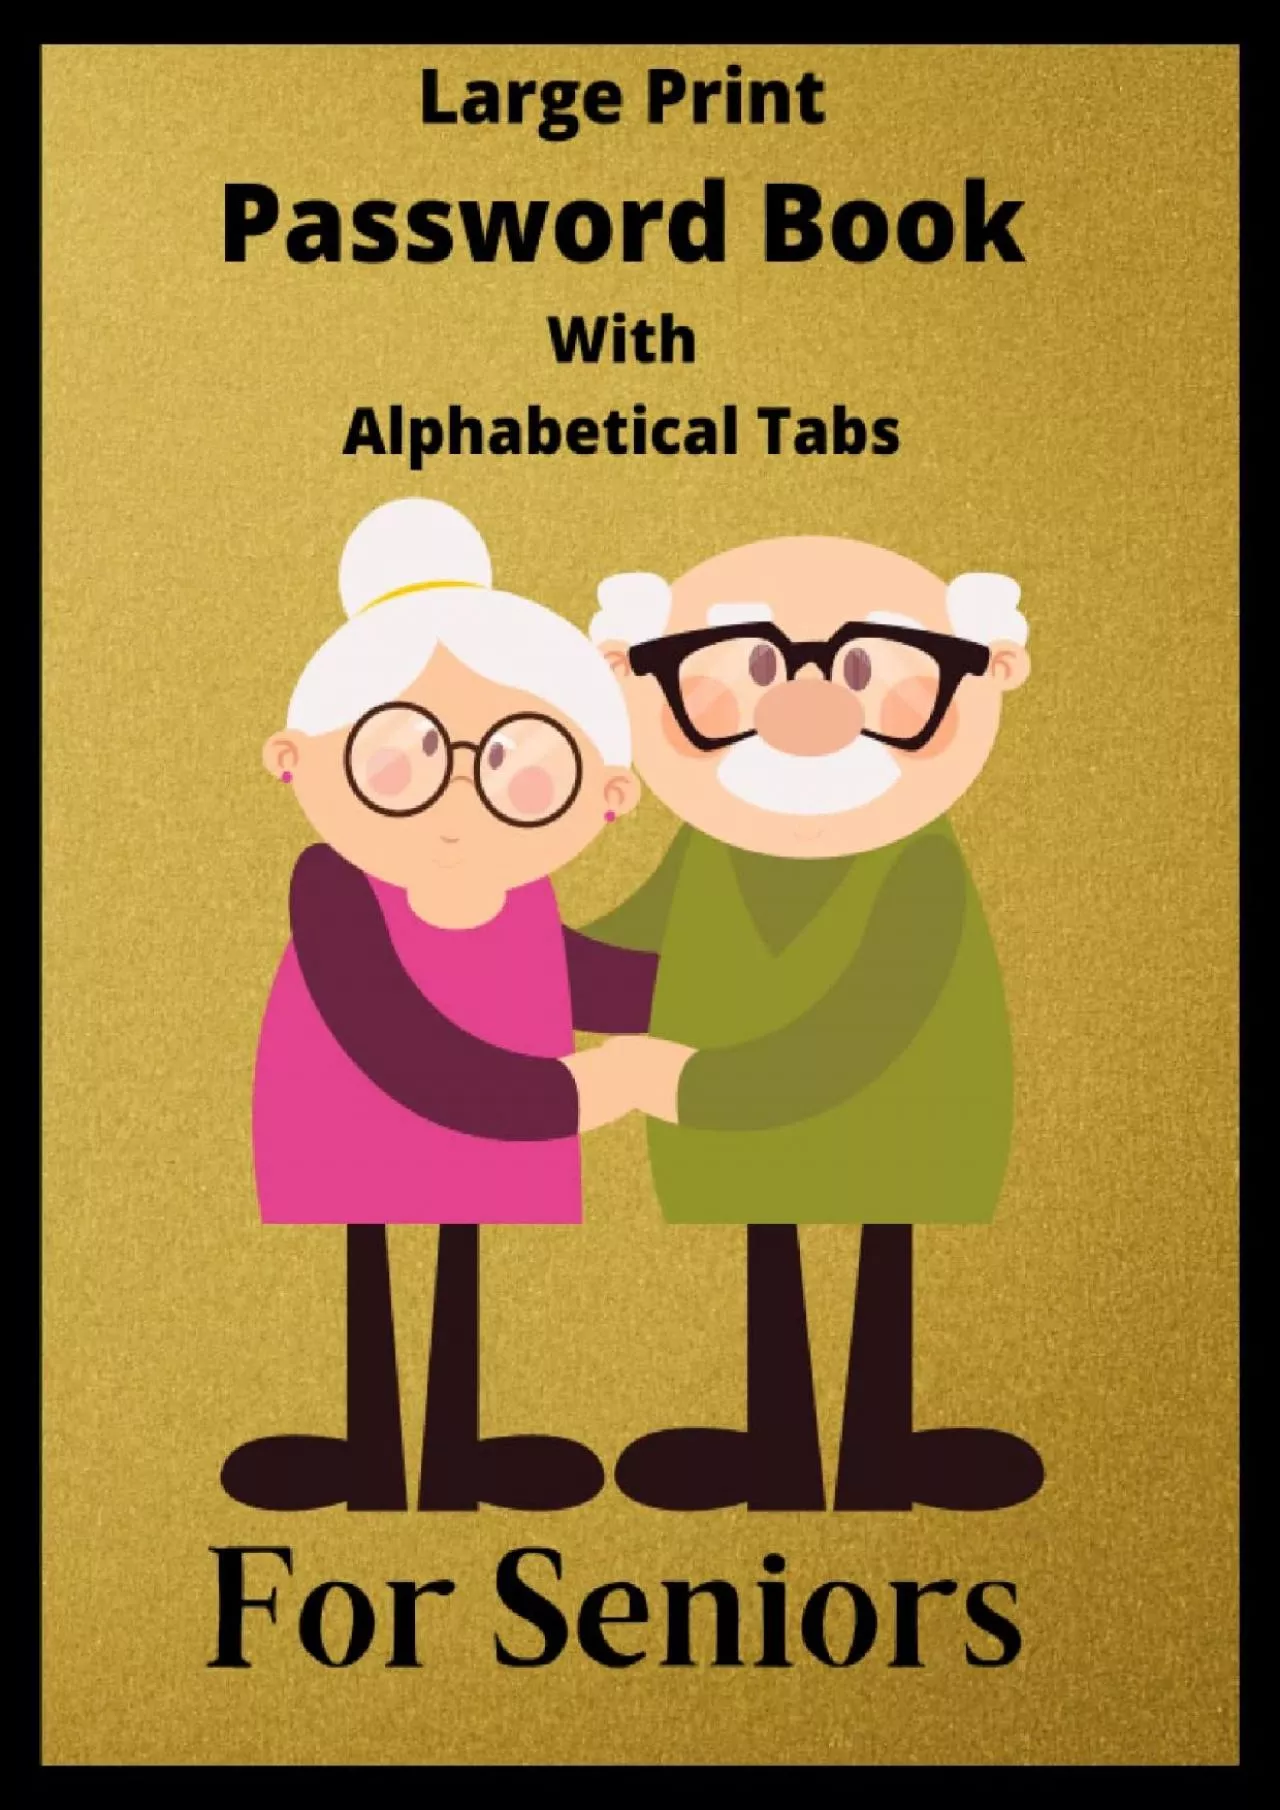 [FREE]-Large Print Password Book With Alphabetical Tabs For Seniors: Password Log Book